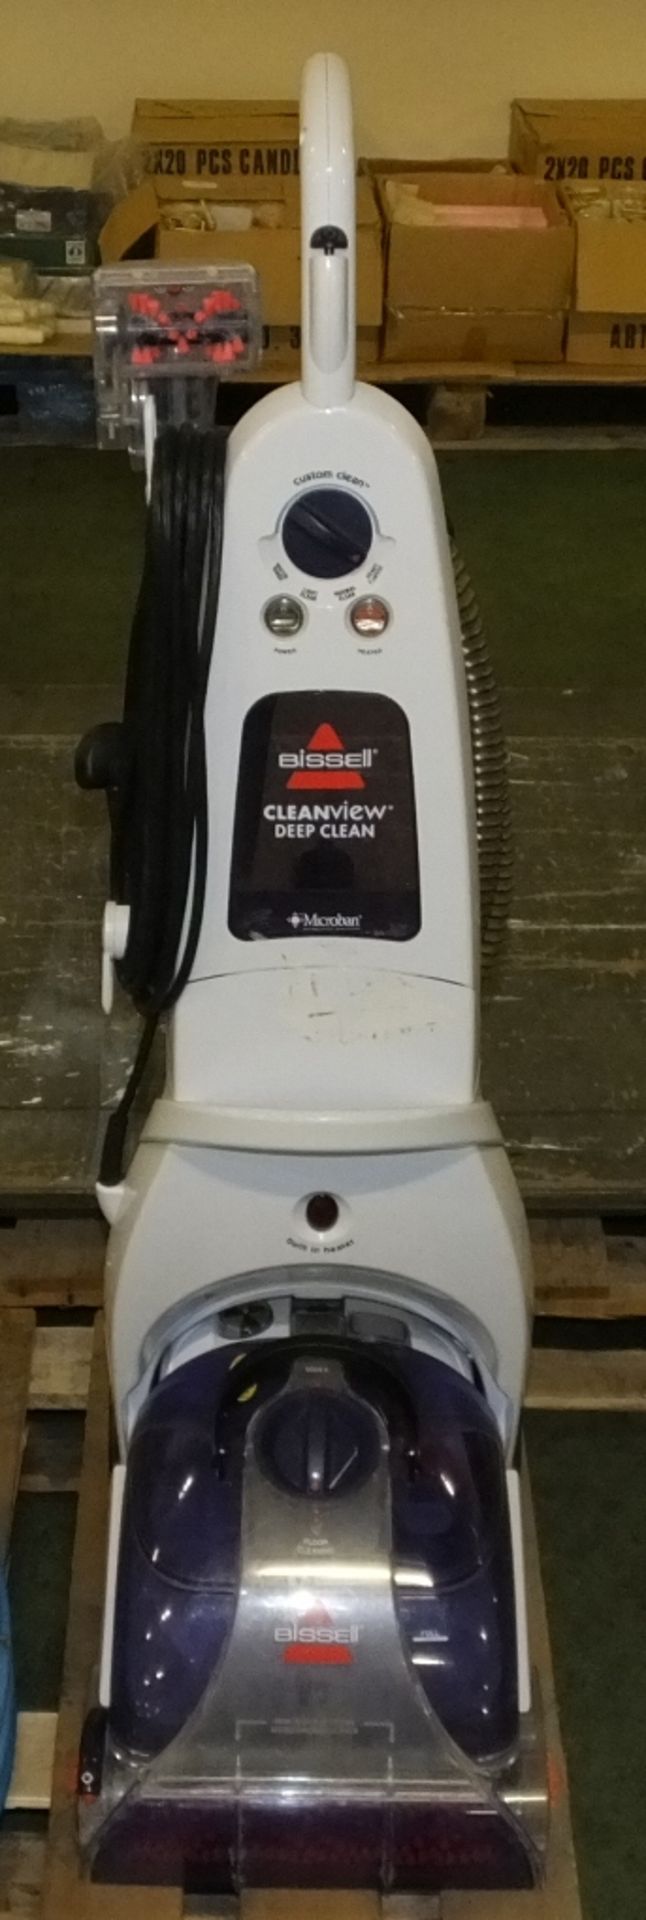 Bissell domestic carpet cleaner - clean view - upright